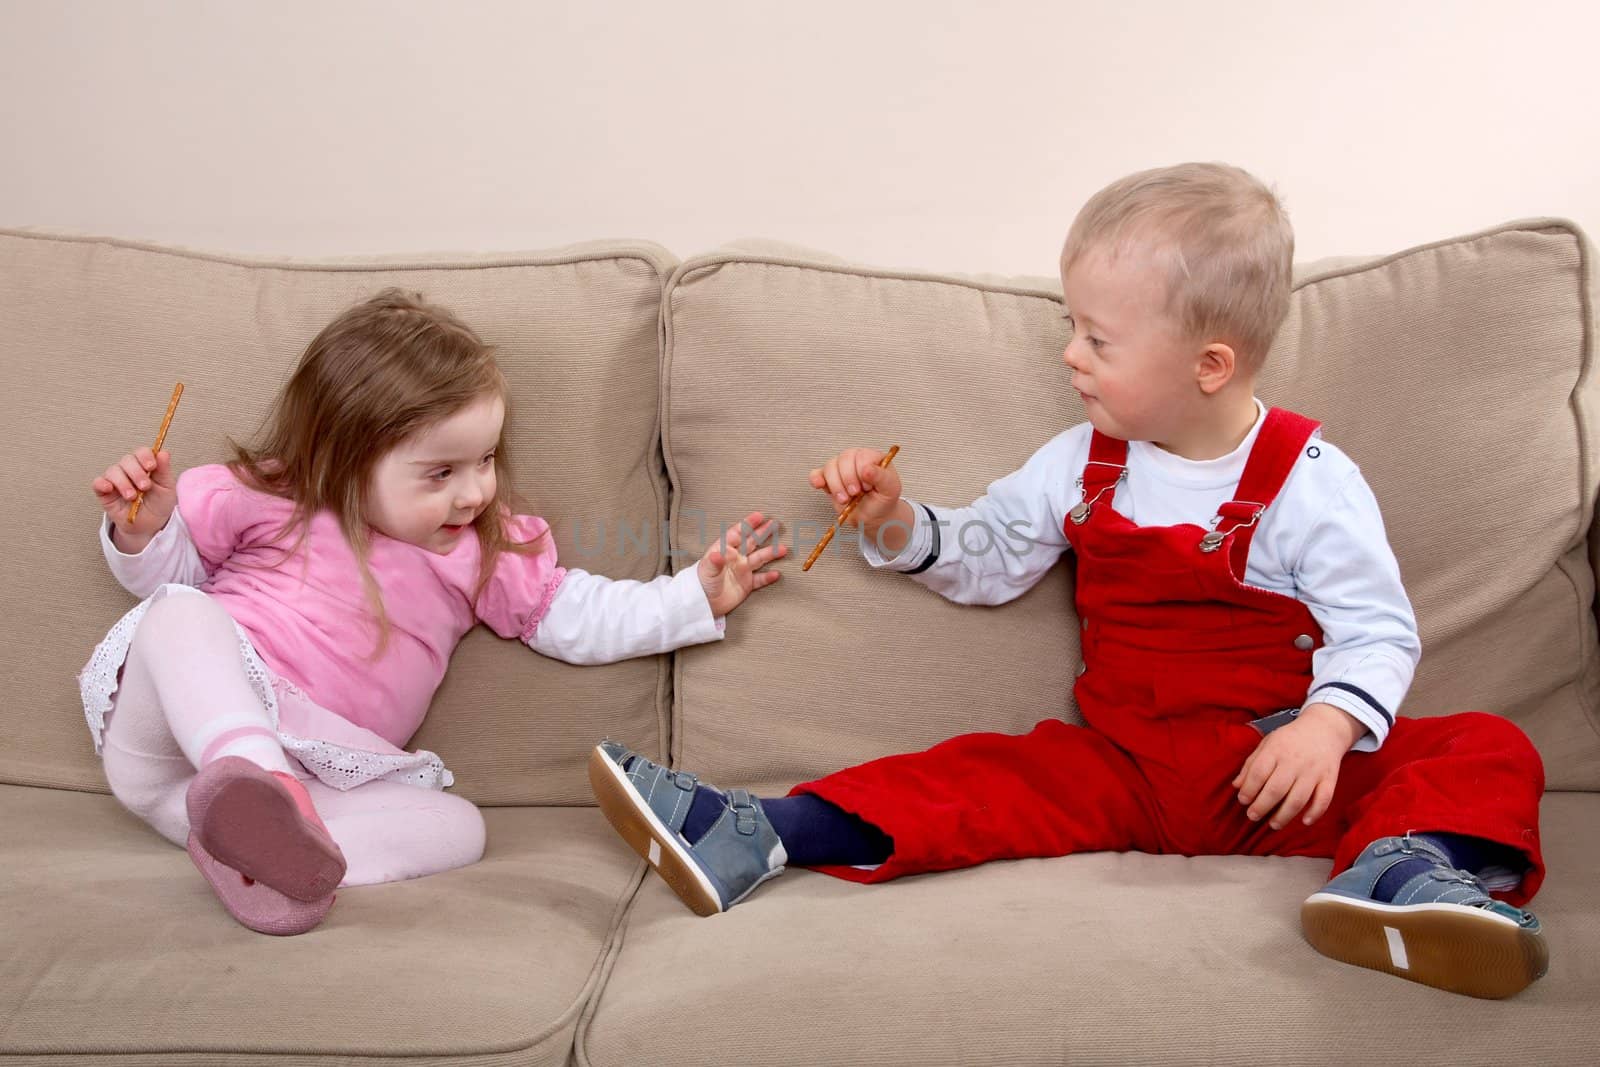 A little boy and girl with Down syndrome sitting on a sofa.